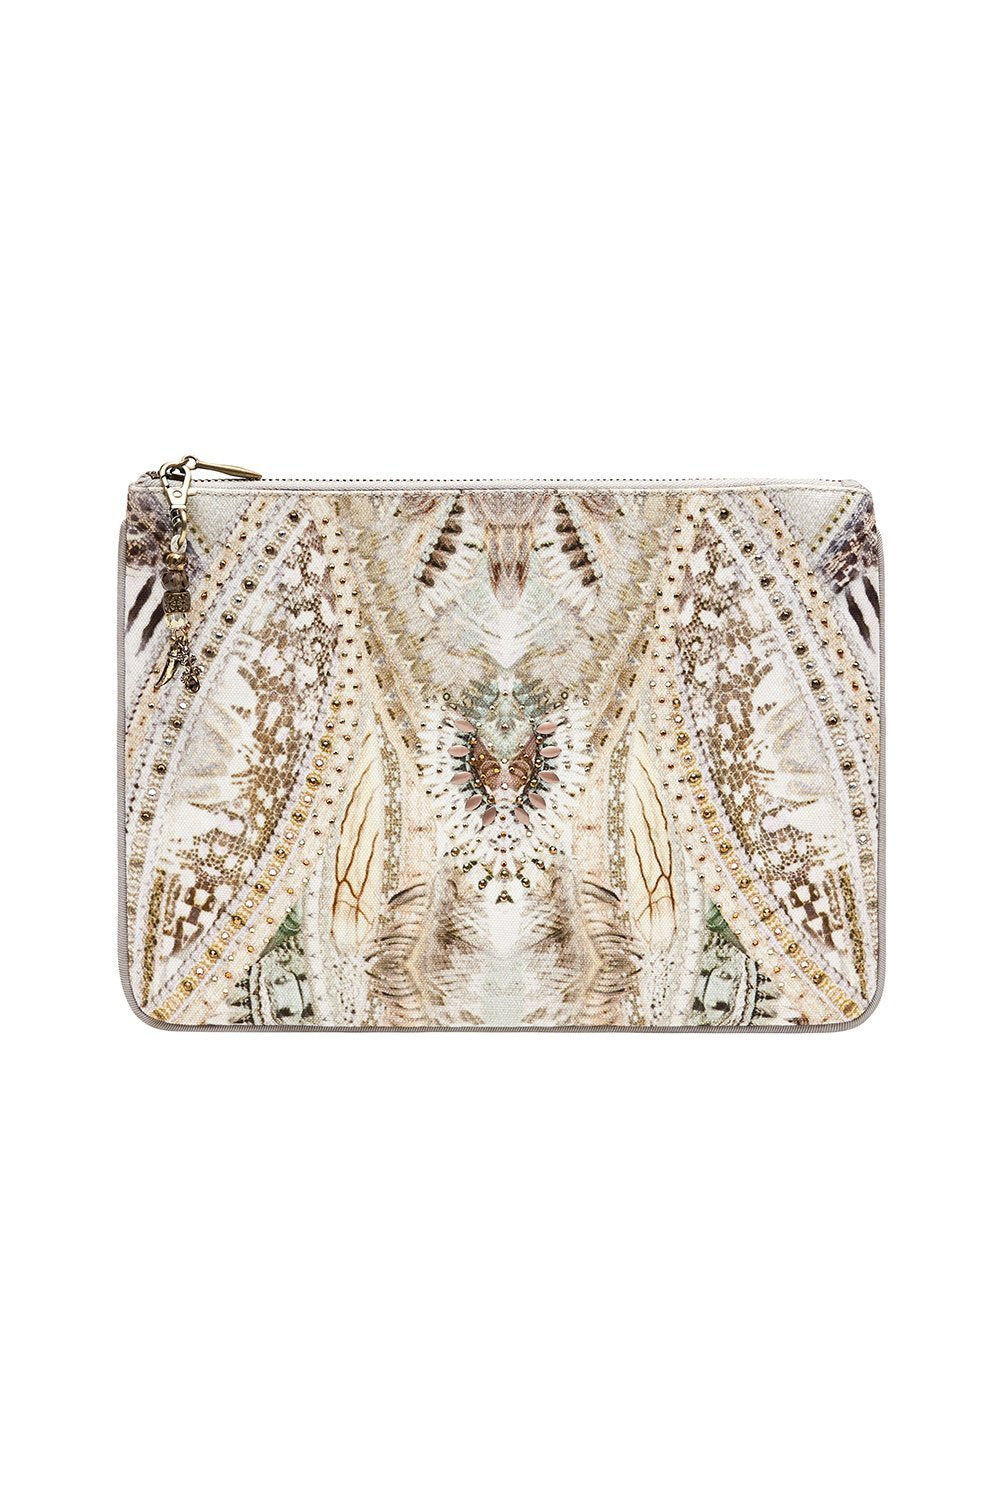 SMALL CANVAS CLUTCH DAINTREE DREAMING